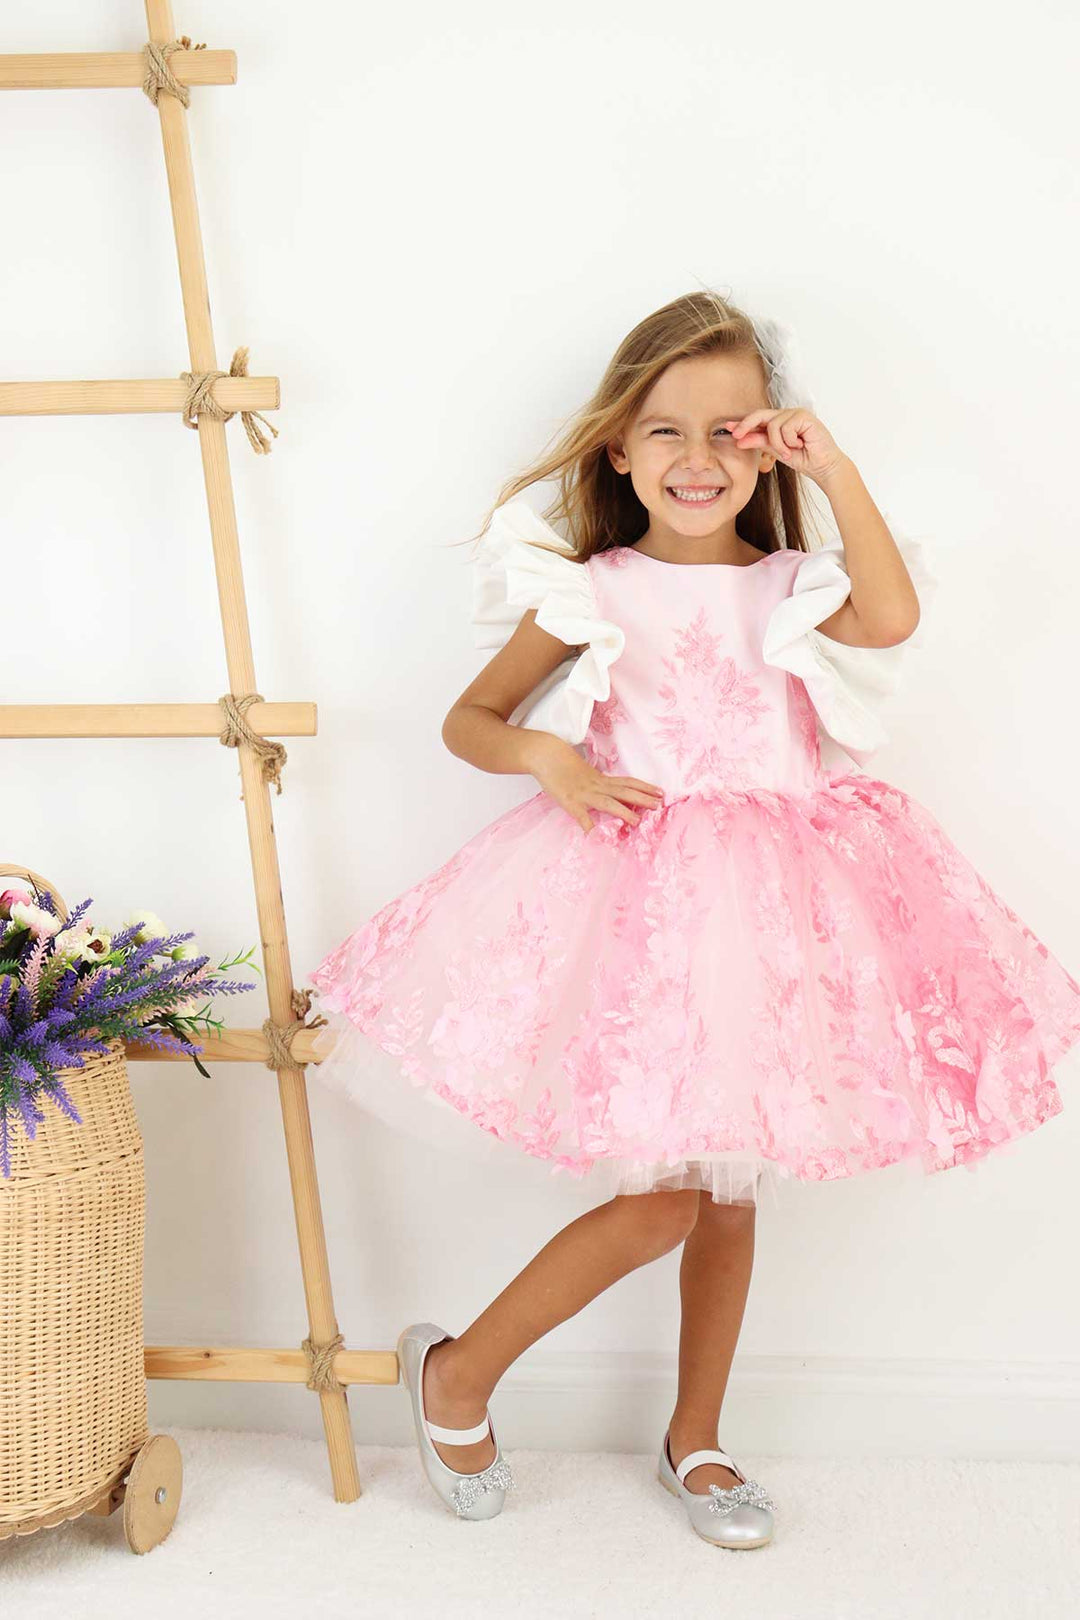 A pink birthday party dress. The dress has 3D floral design, puffy skirt, and balloon arm